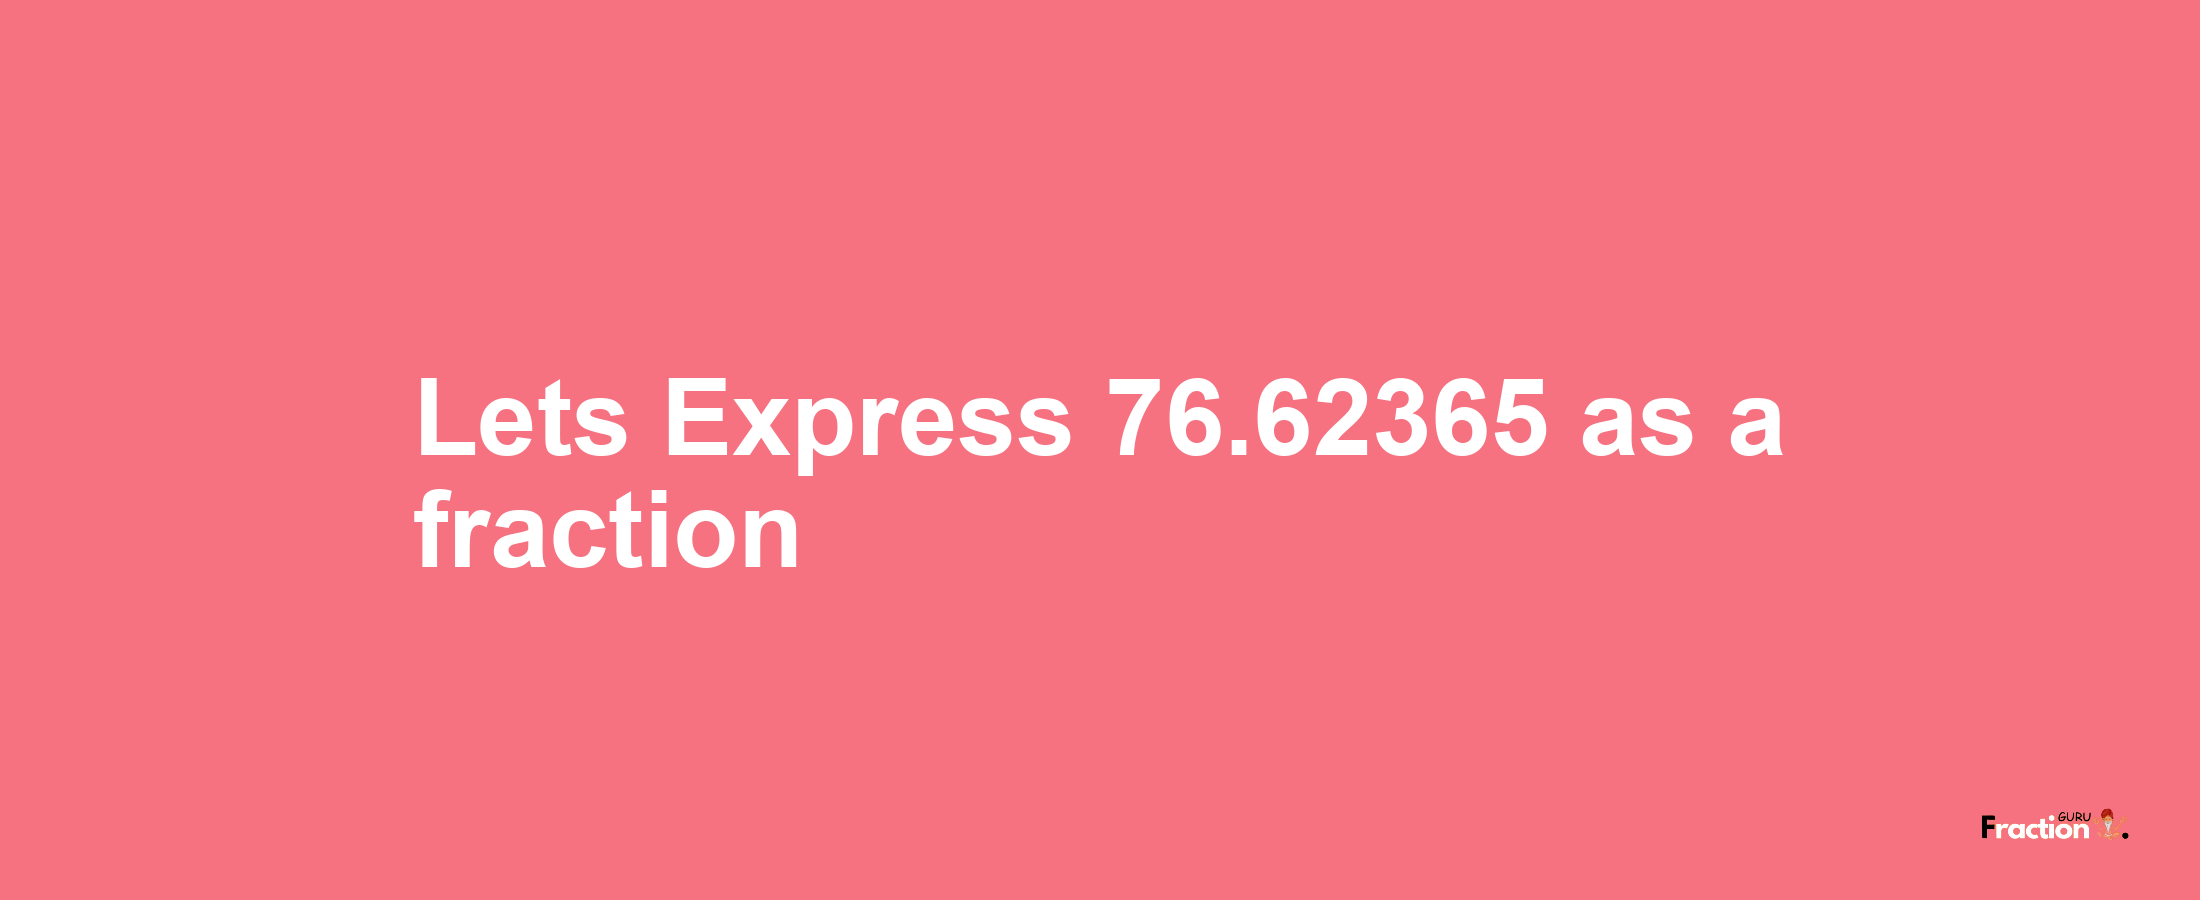 Lets Express 76.62365 as afraction